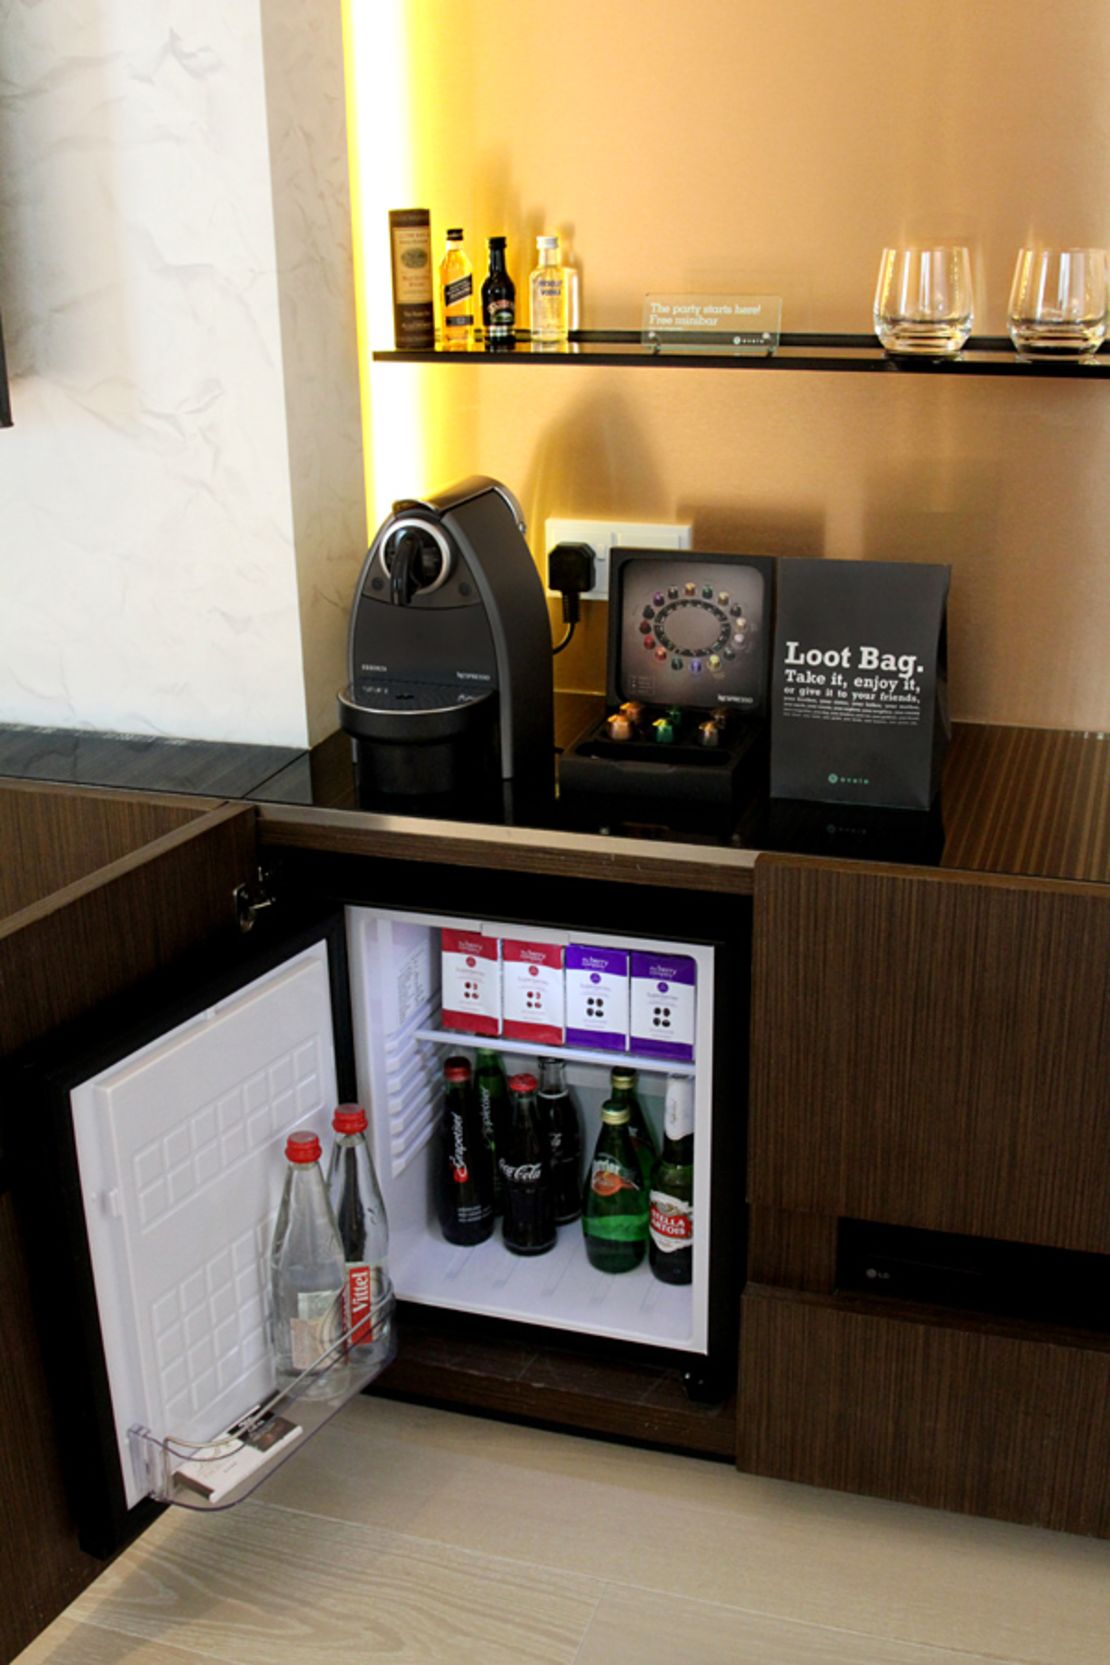 The hotel minibar is dying; long live the nearby convenience store